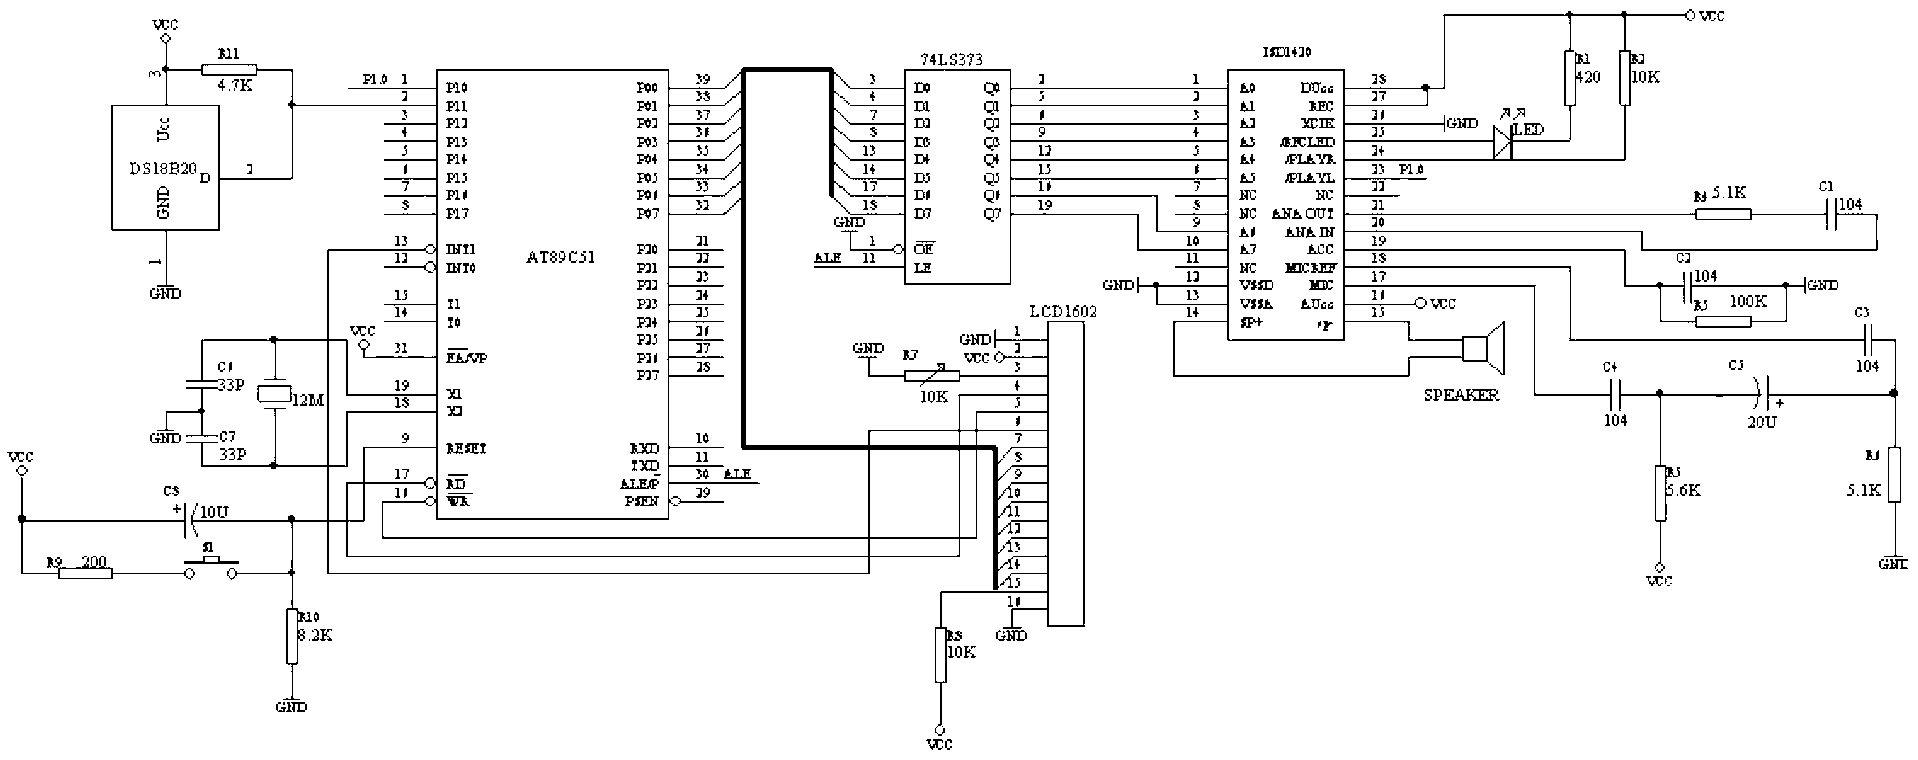 Control device of domestic intelligent electric control fan heater